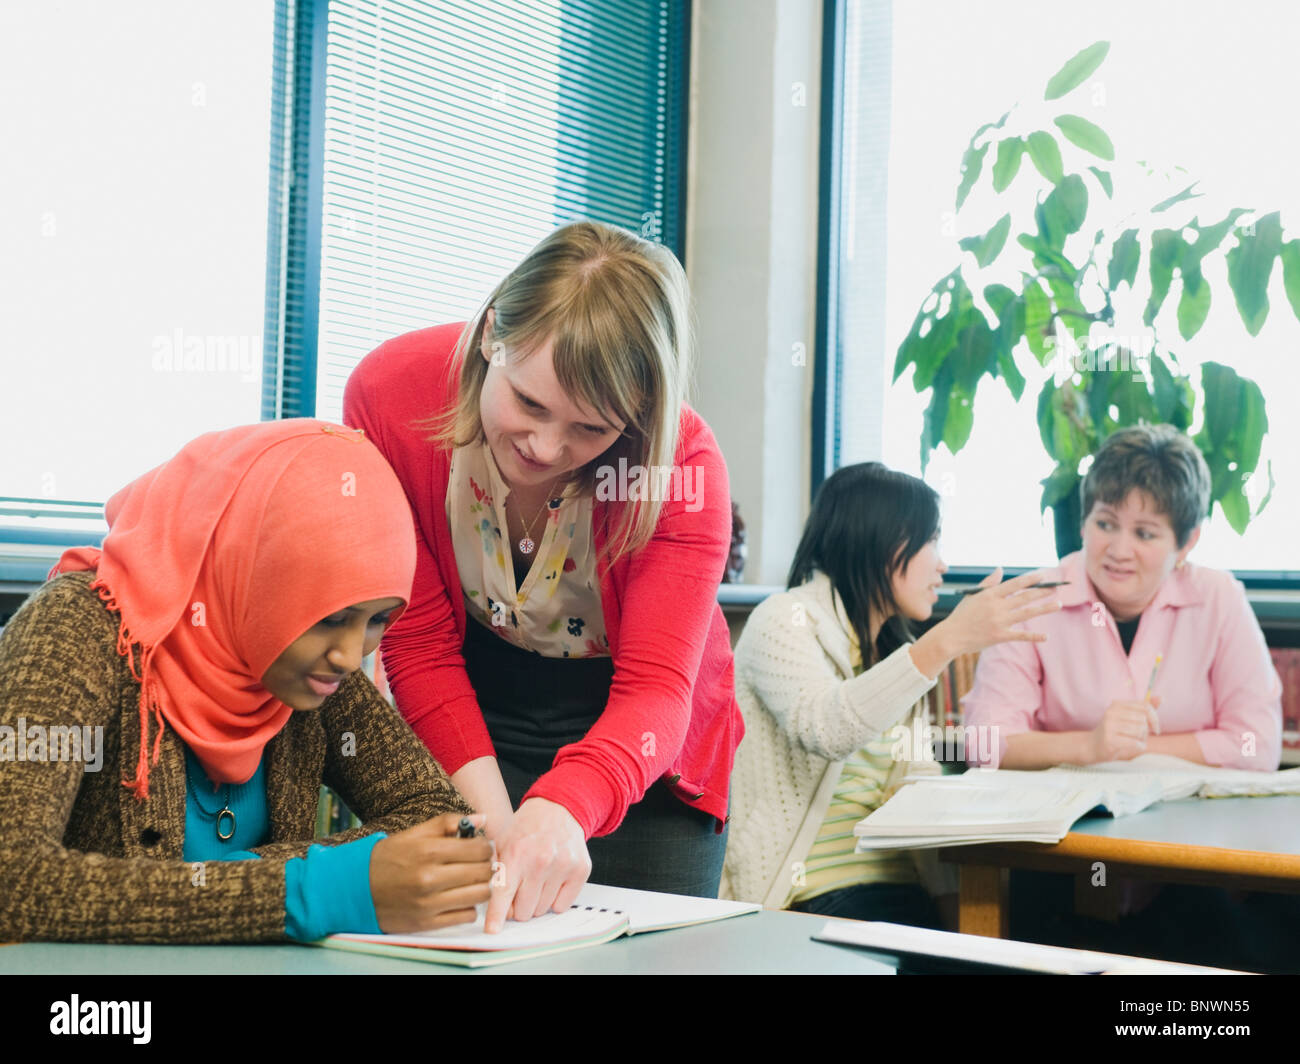 adults-students-learning-english-as-a-second-language-stock-photo-alamy